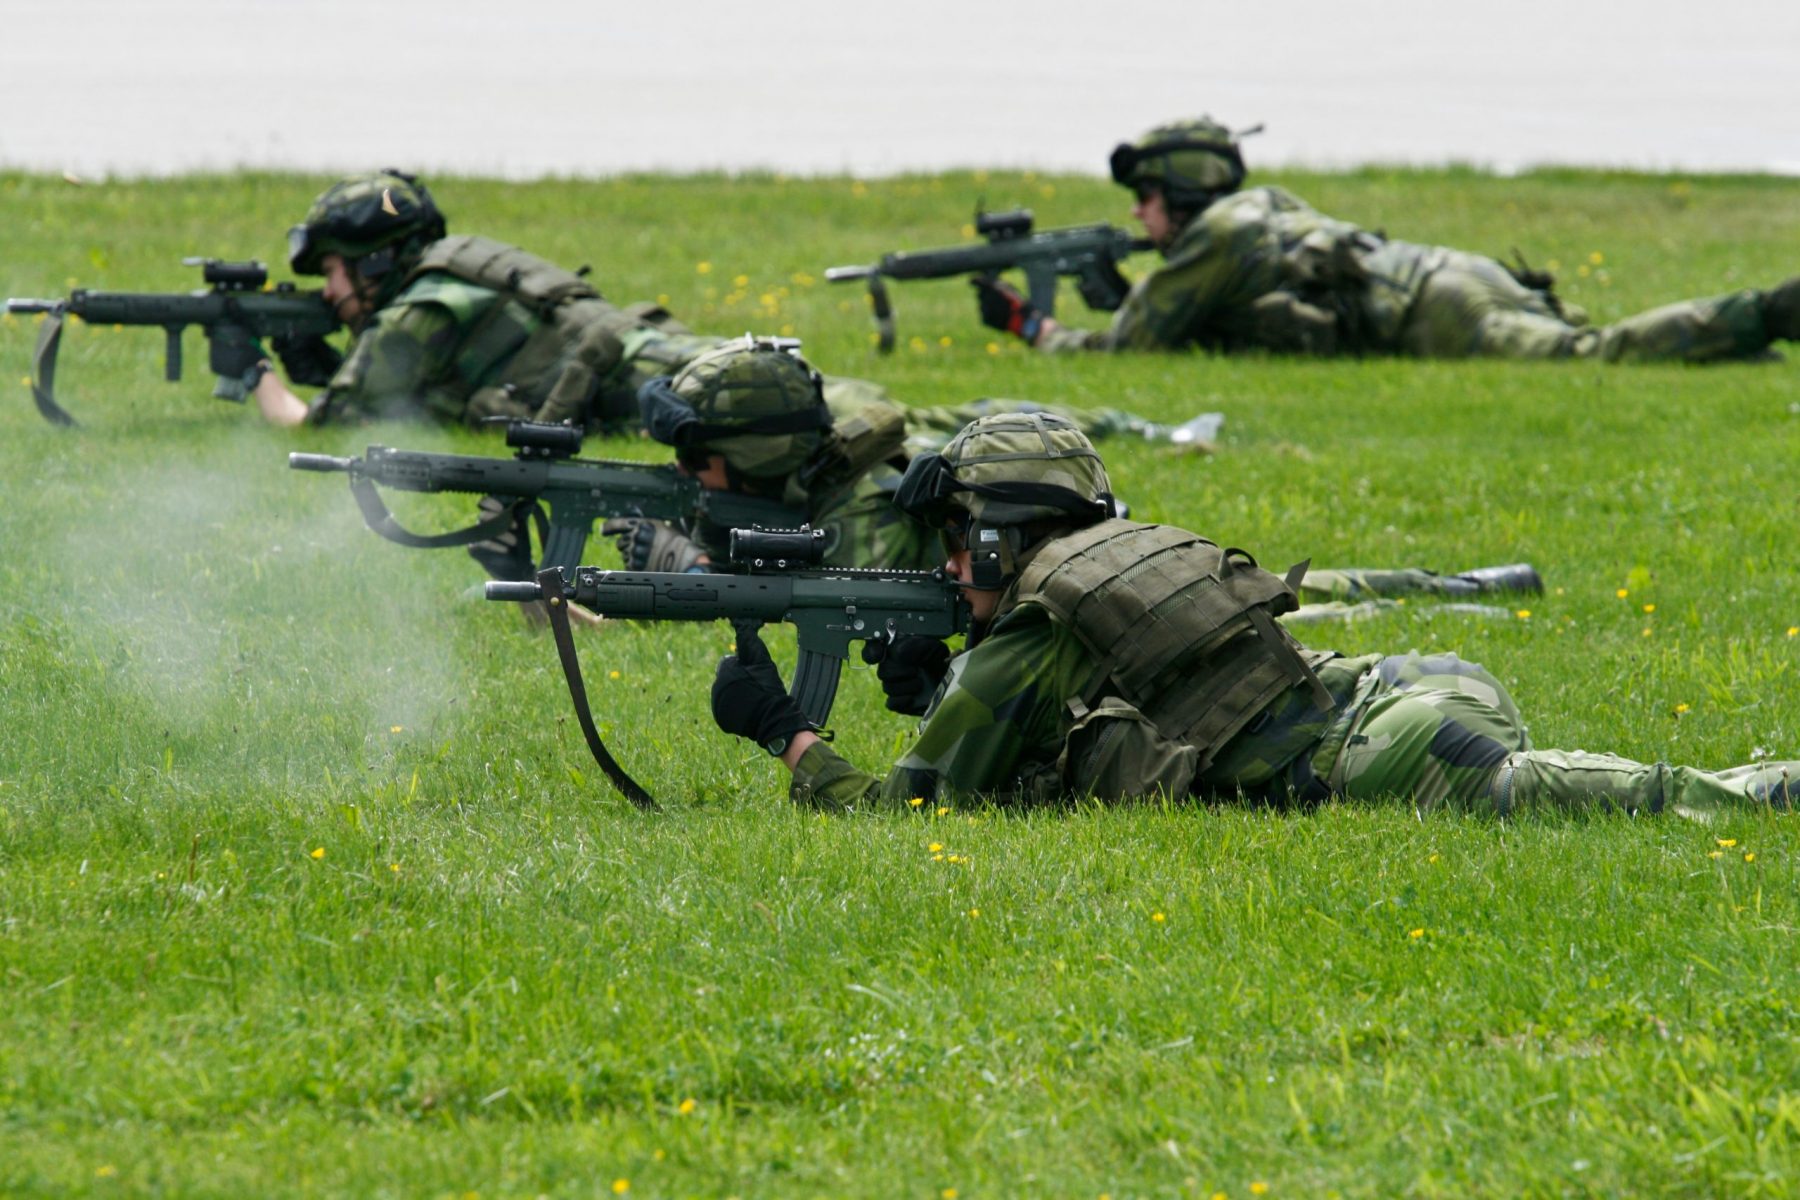 Simulated attack by Swedish ground forces. (Photo by Marcel Burger)